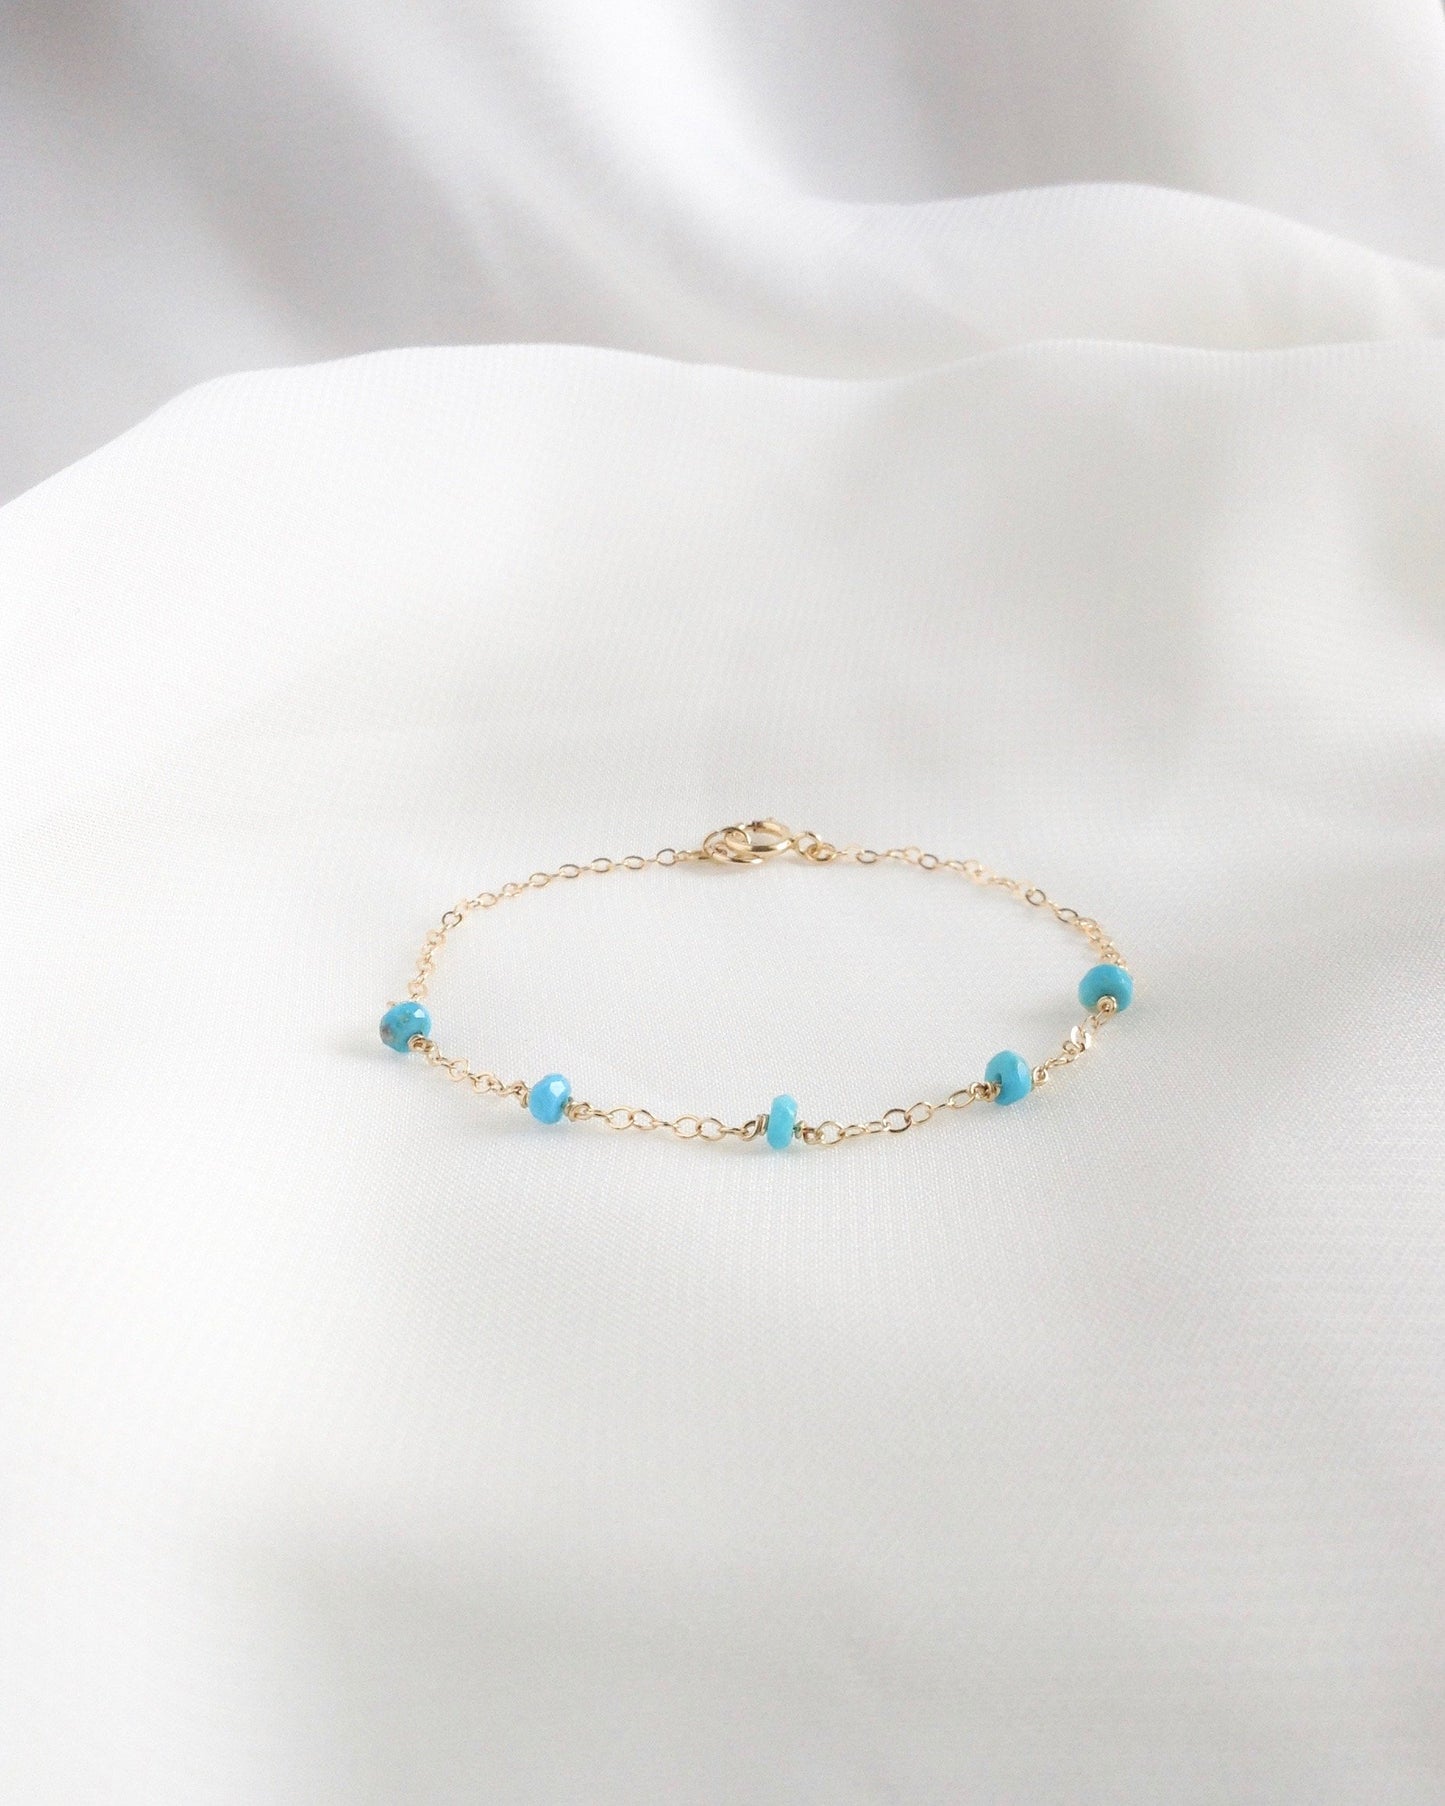 Sleeping Beauty Turquoise Delicate Thin Chain Bracelet in Gold Filled or Sterling Silver | IB Jewelry